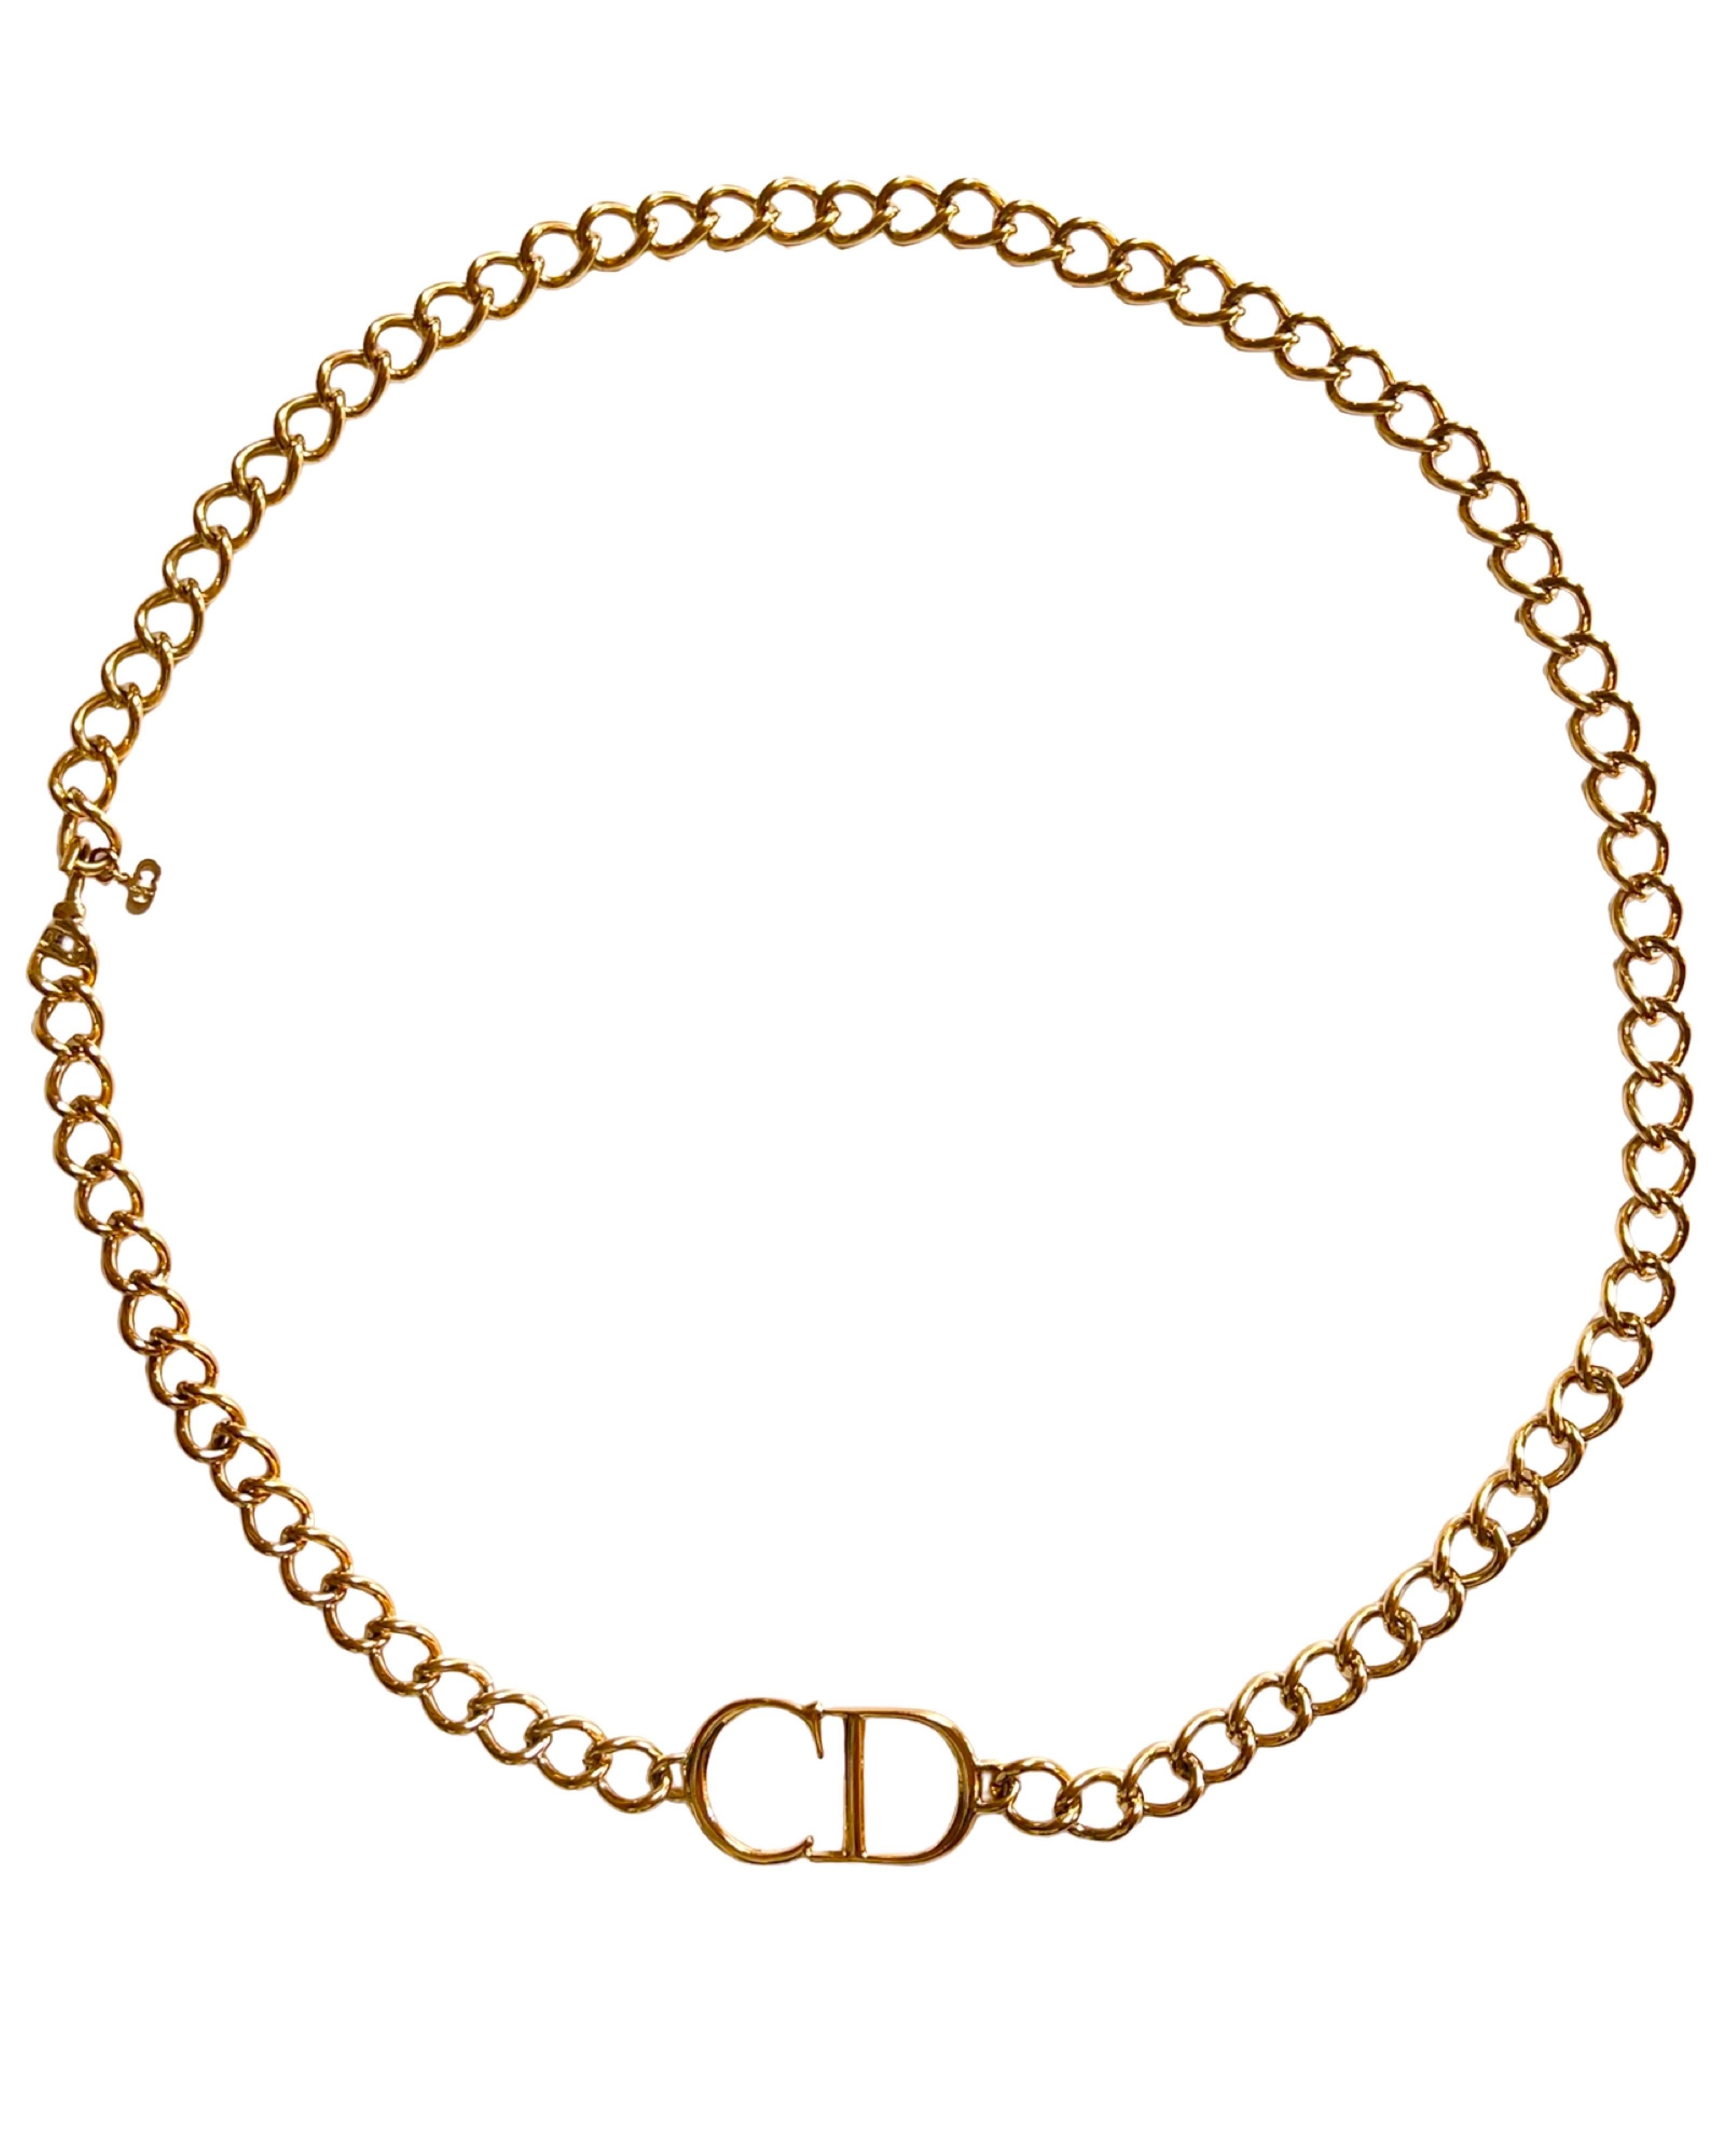 An amazing, statement chain with the iconic 2000 Dior CD logo, can be worn as a belt, a choker and a necklace! 

The total length is 90 cm or 35,4 in, the logo is 5x2 cm or 2x0,8 in

 

The chain is in an excellent vintage condition with a